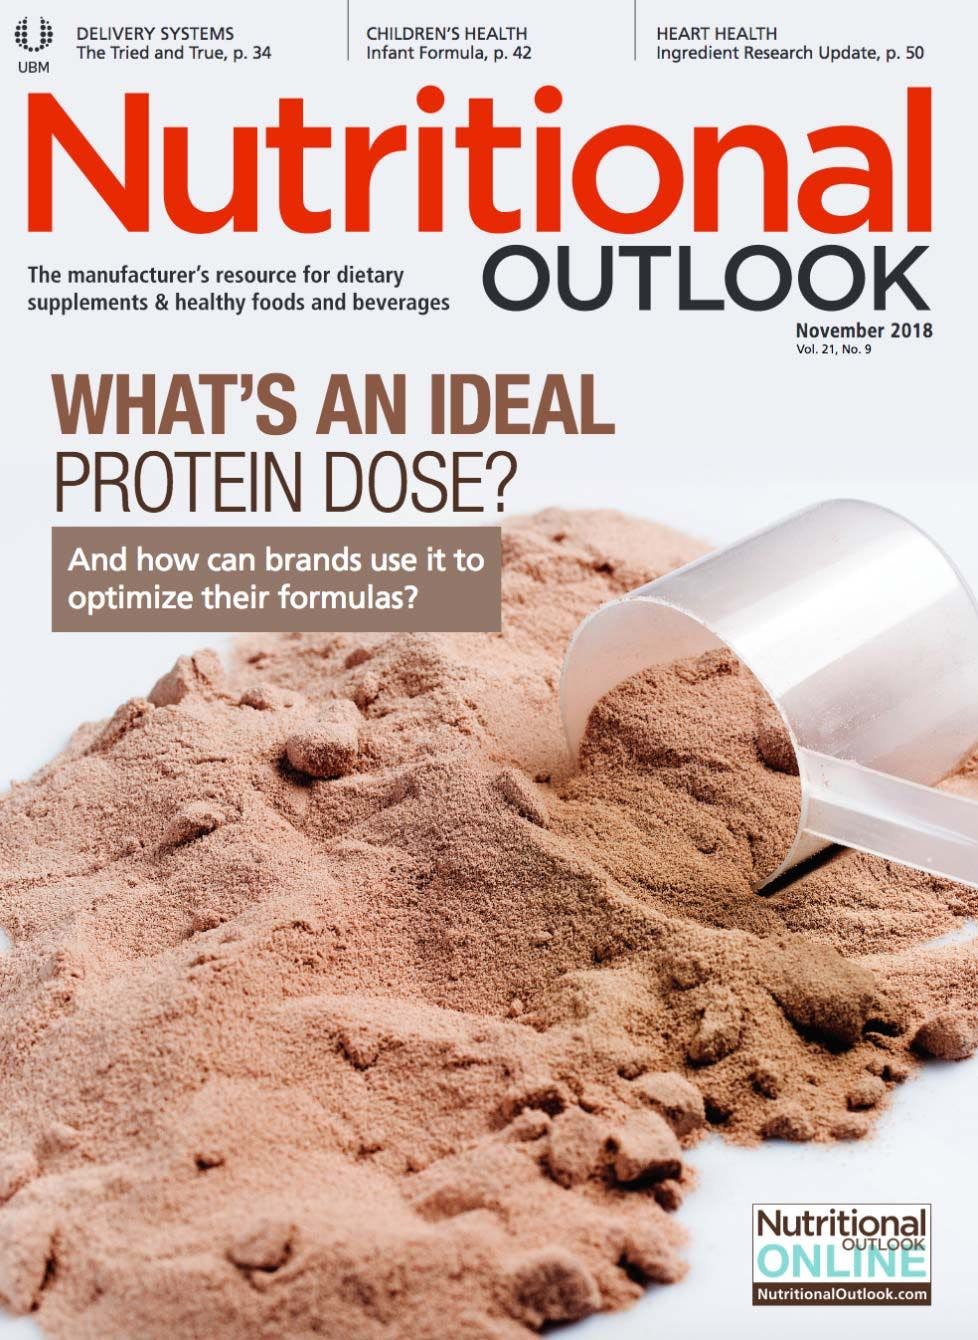 Nutritional Outlook Vol. 21 No. 9